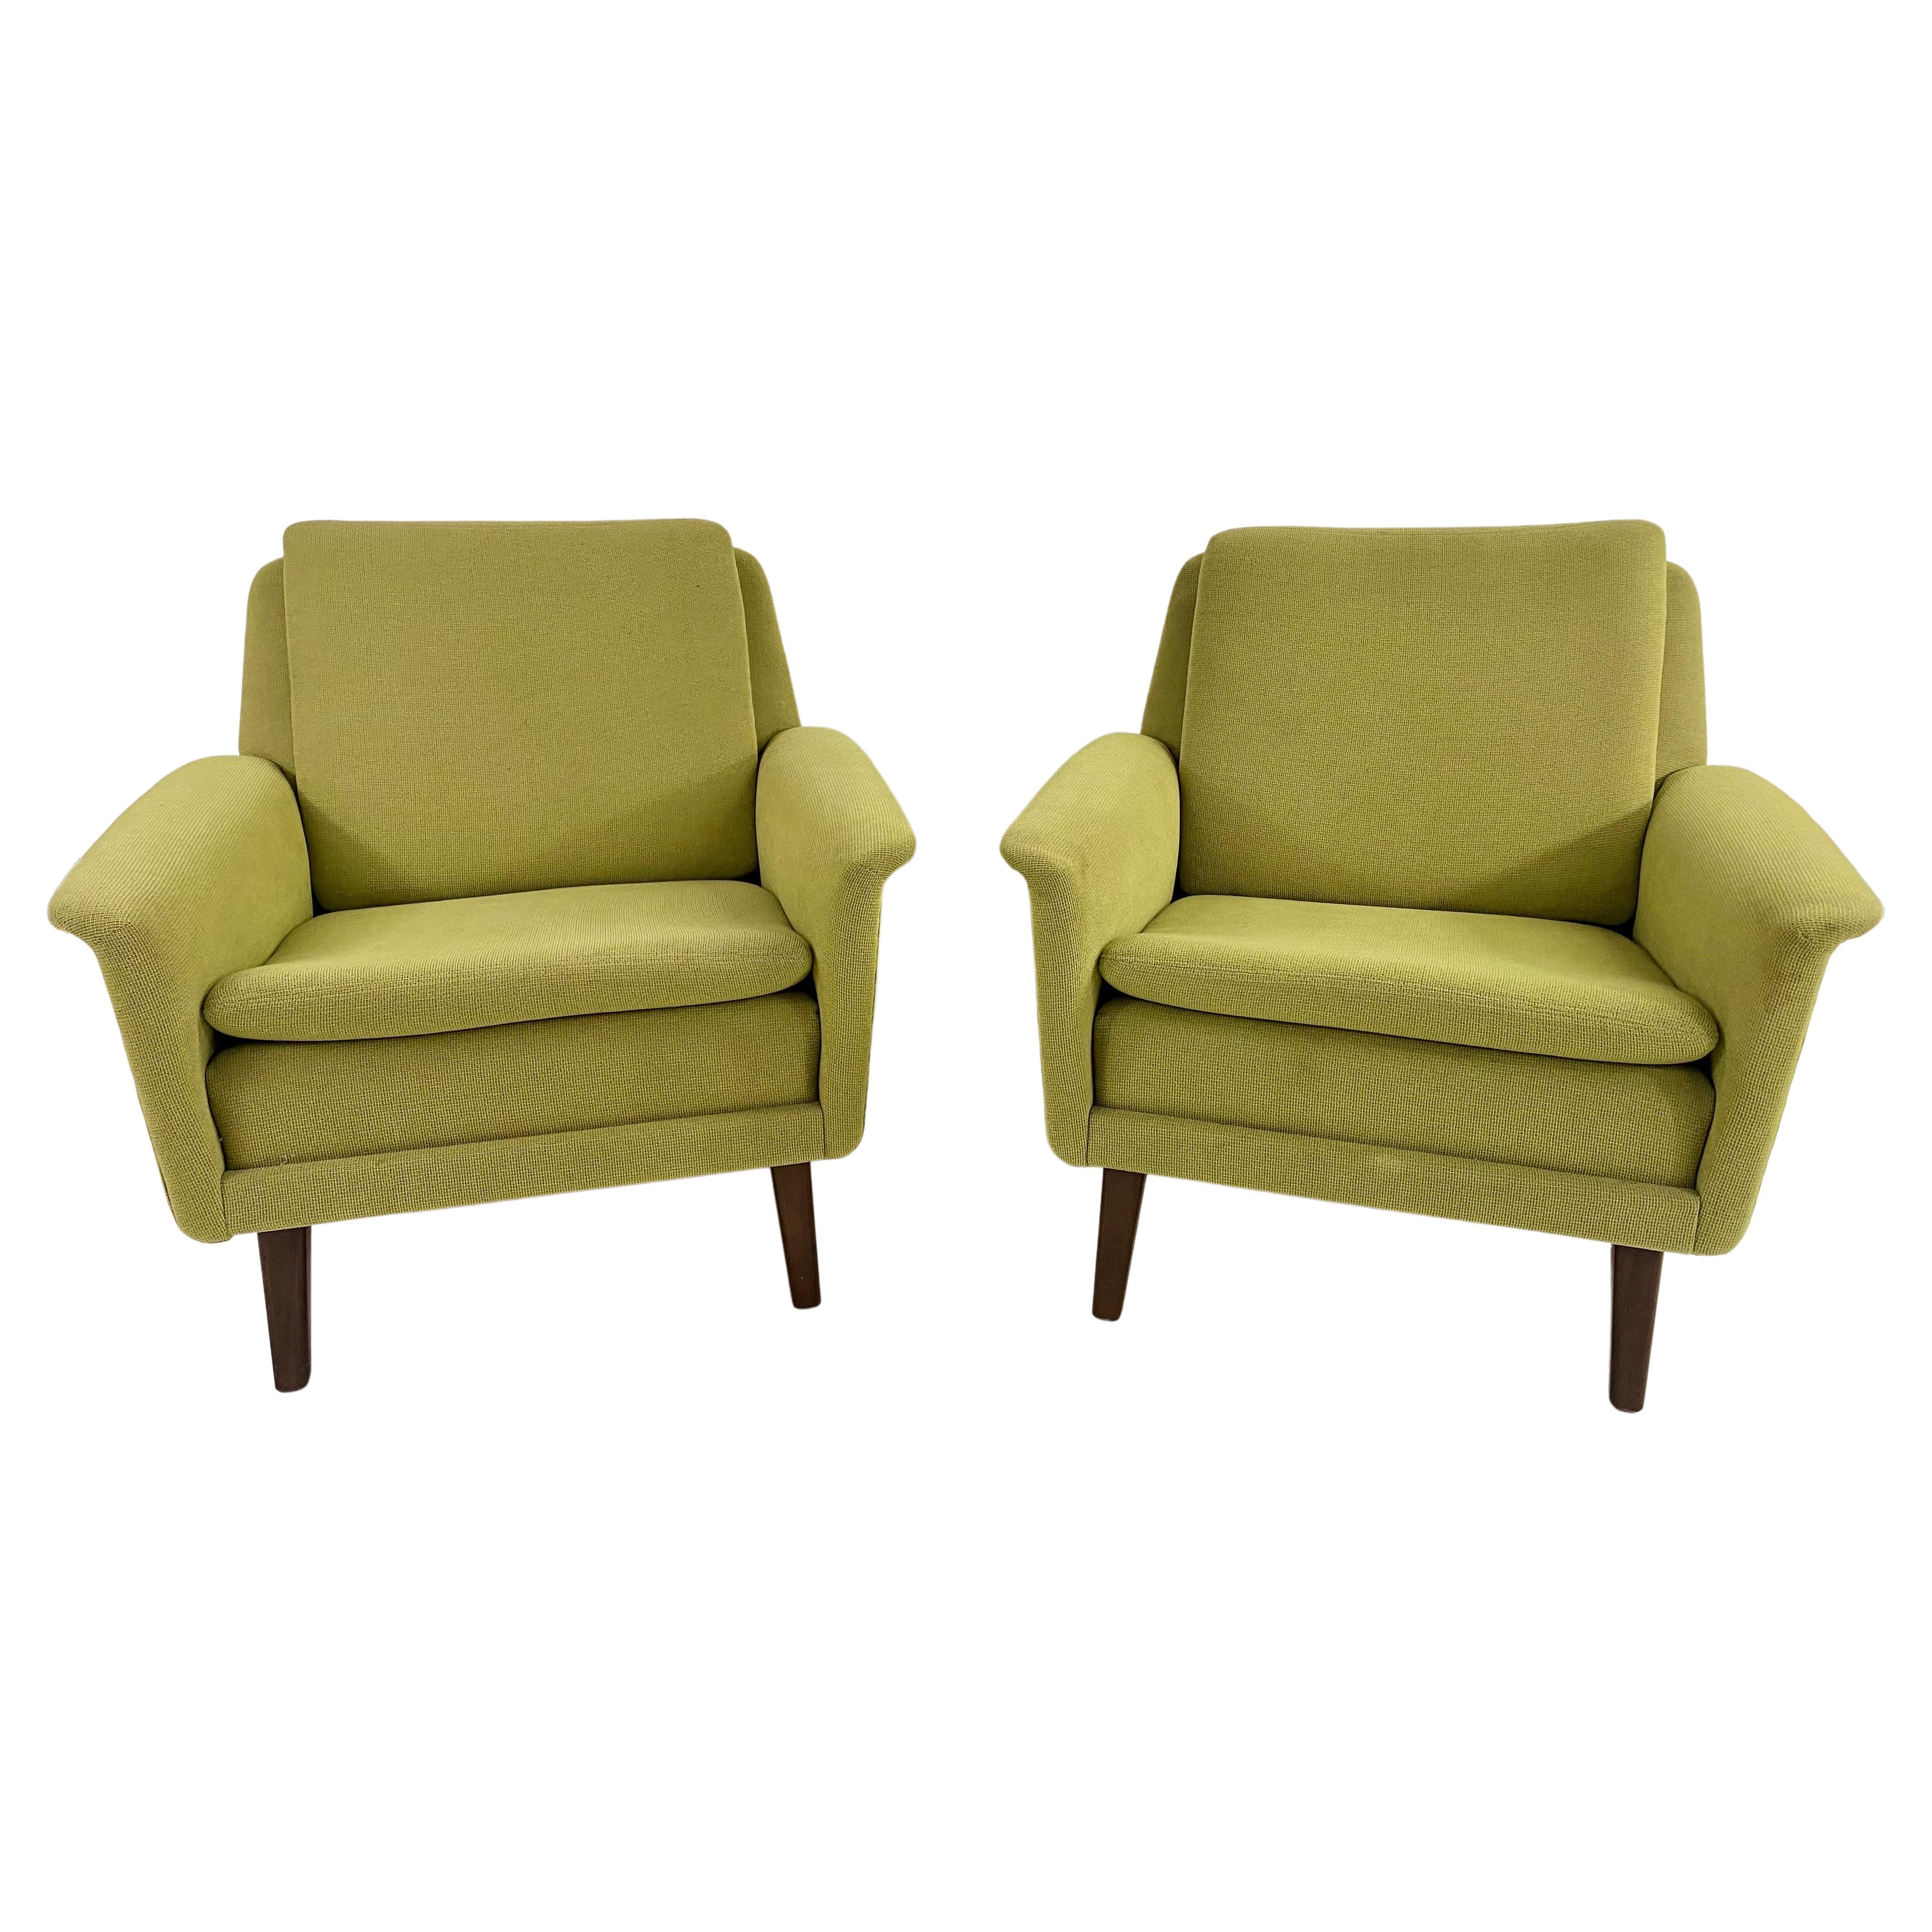 A pair of Mid-Century Modern lounge or easy chairs designed by Folke Ohlsson (Sweden, 1919-2003) for Fritz Hansen ( established - Denmark 1872 by Cabinet Maker Fritz Hansen). 

These conformable and fine lounge chairs model 0863 were crafted and